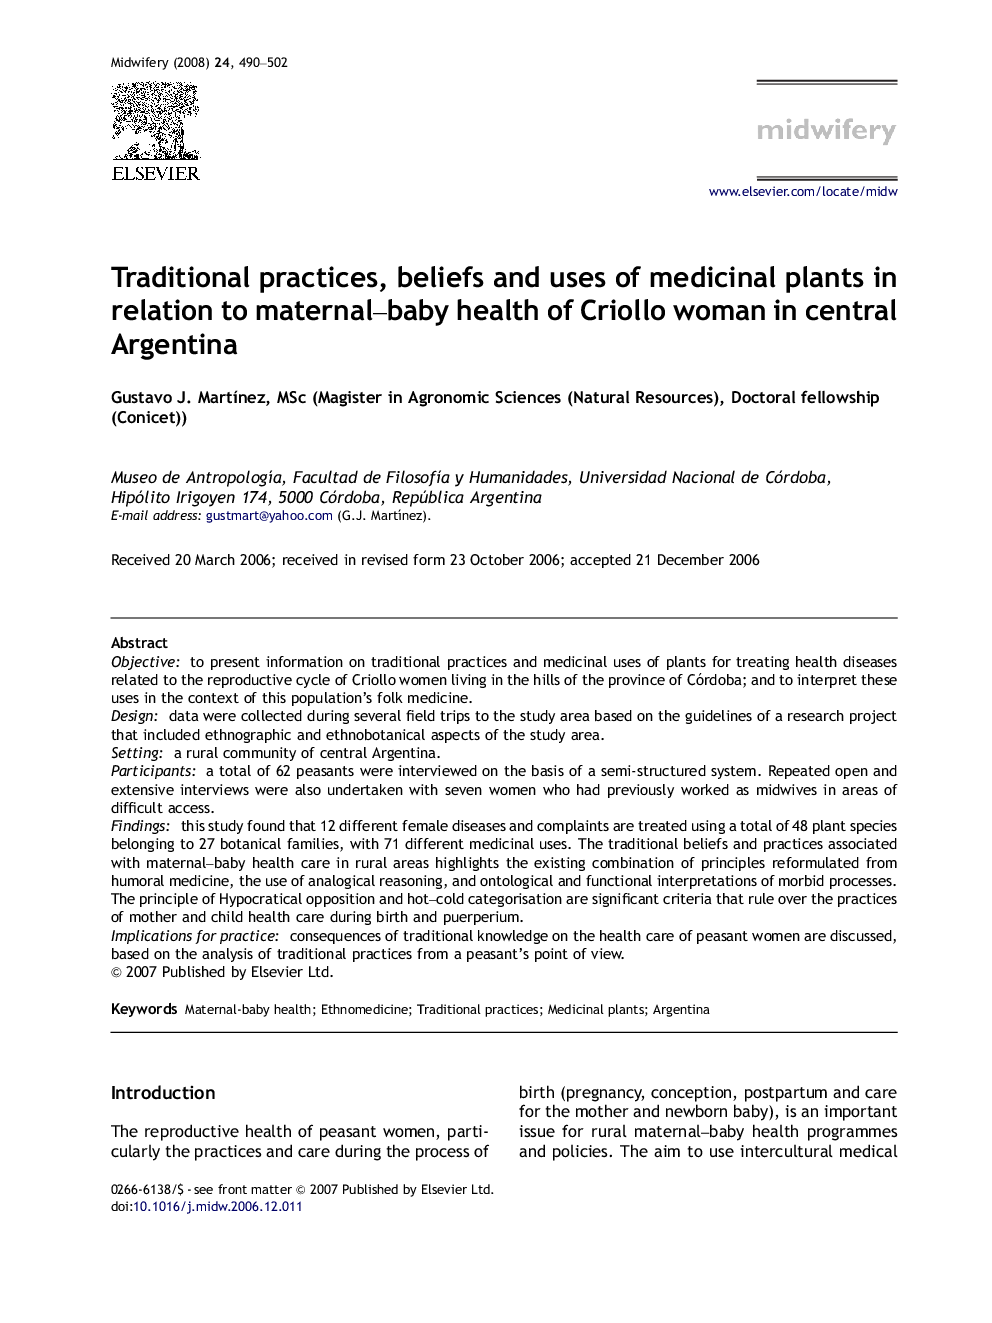 Traditional practices, beliefs and uses of medicinal plants in relation to maternal–baby health of Criollo woman in central Argentina